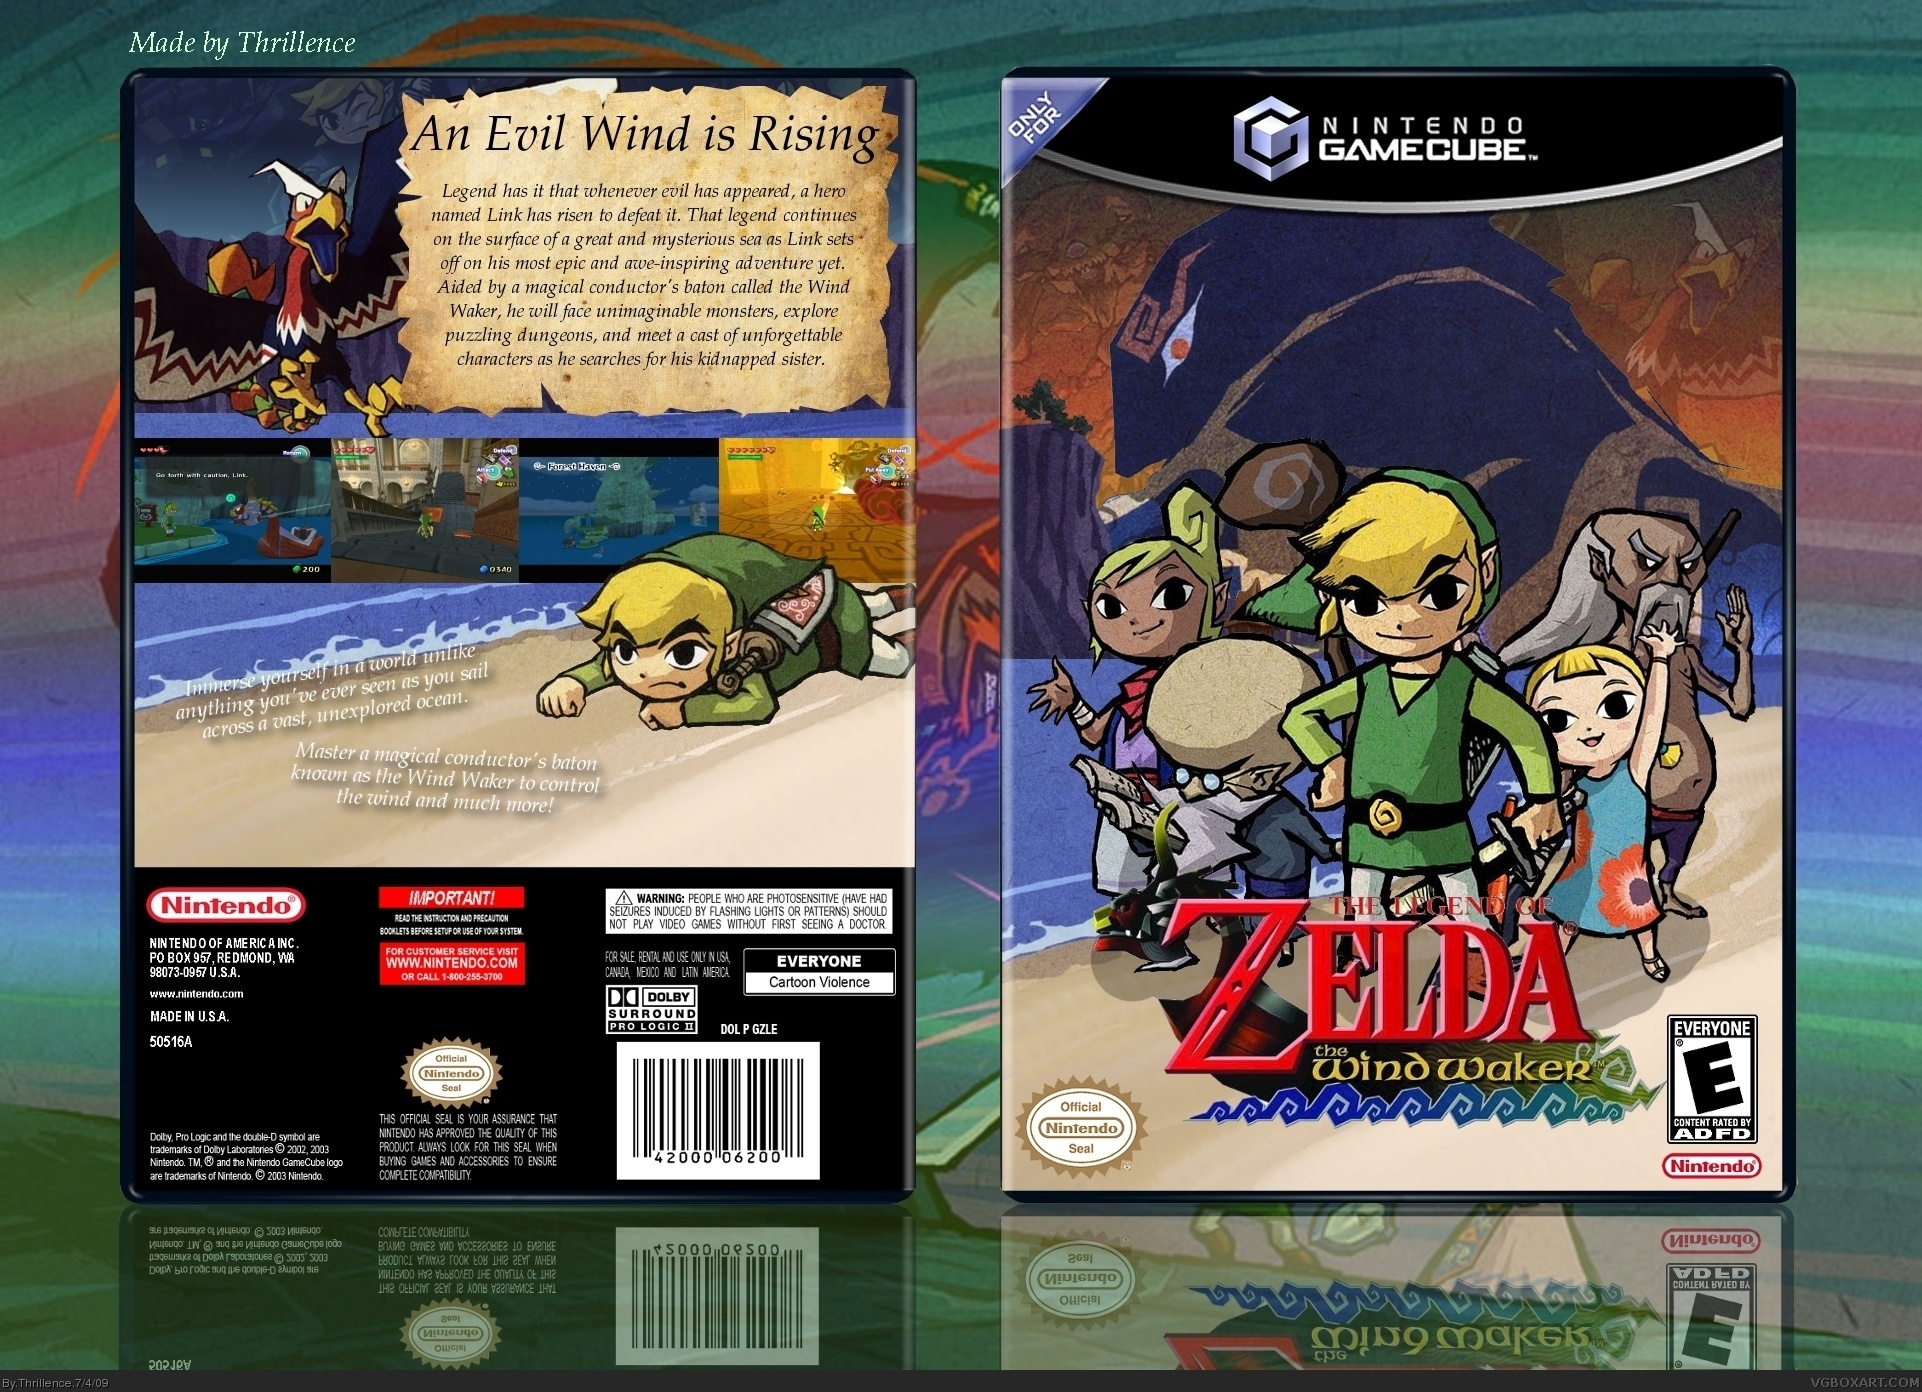 The Legend of Zelda: The Wind Waker GameCube Box Art Cover by Thrillence1922 x 1392